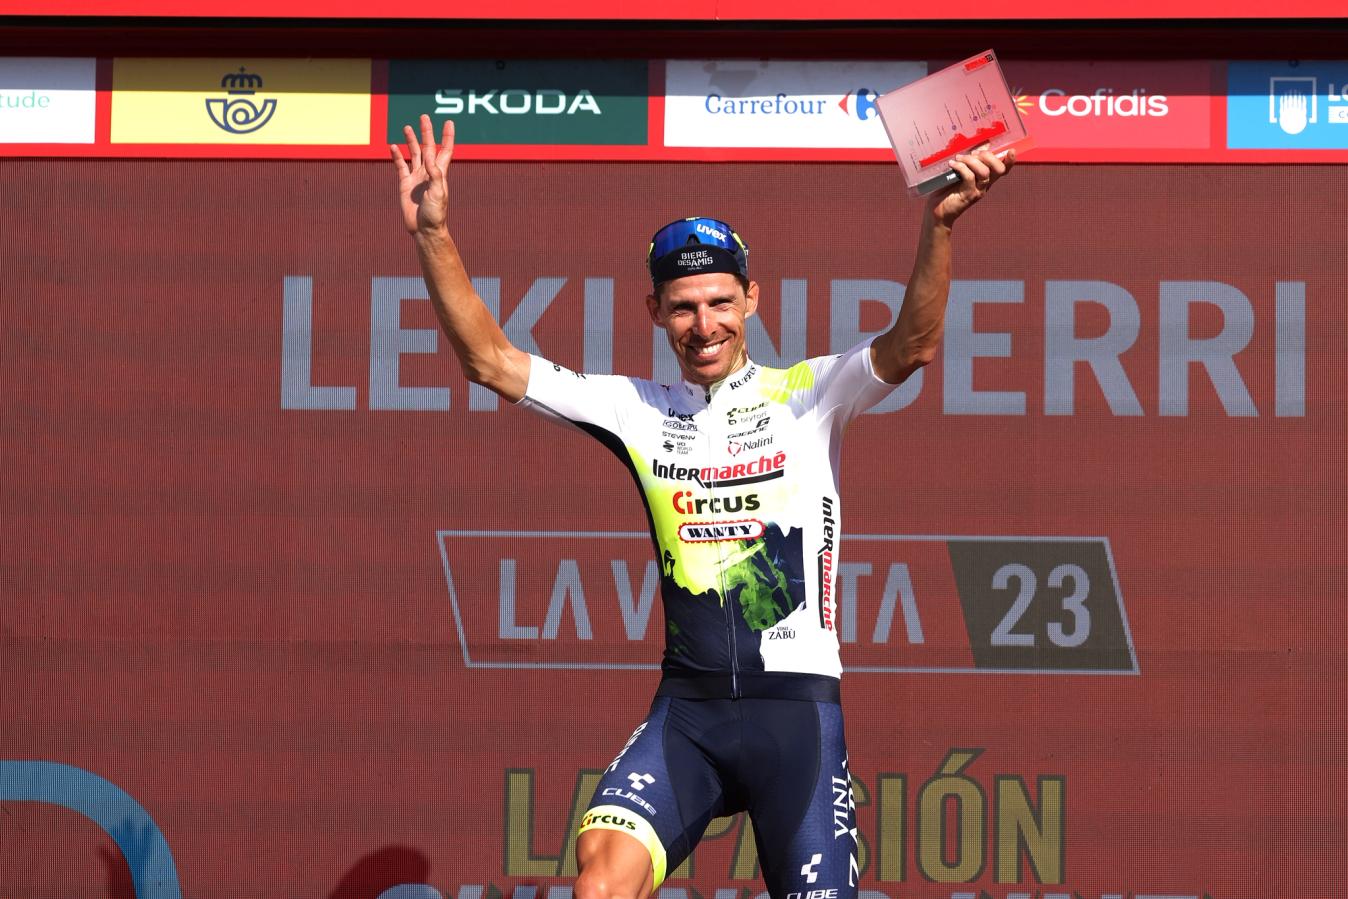 Rui Costa won a stage at the Vuelta a España, but it didn't prove enough to impress Intermarché